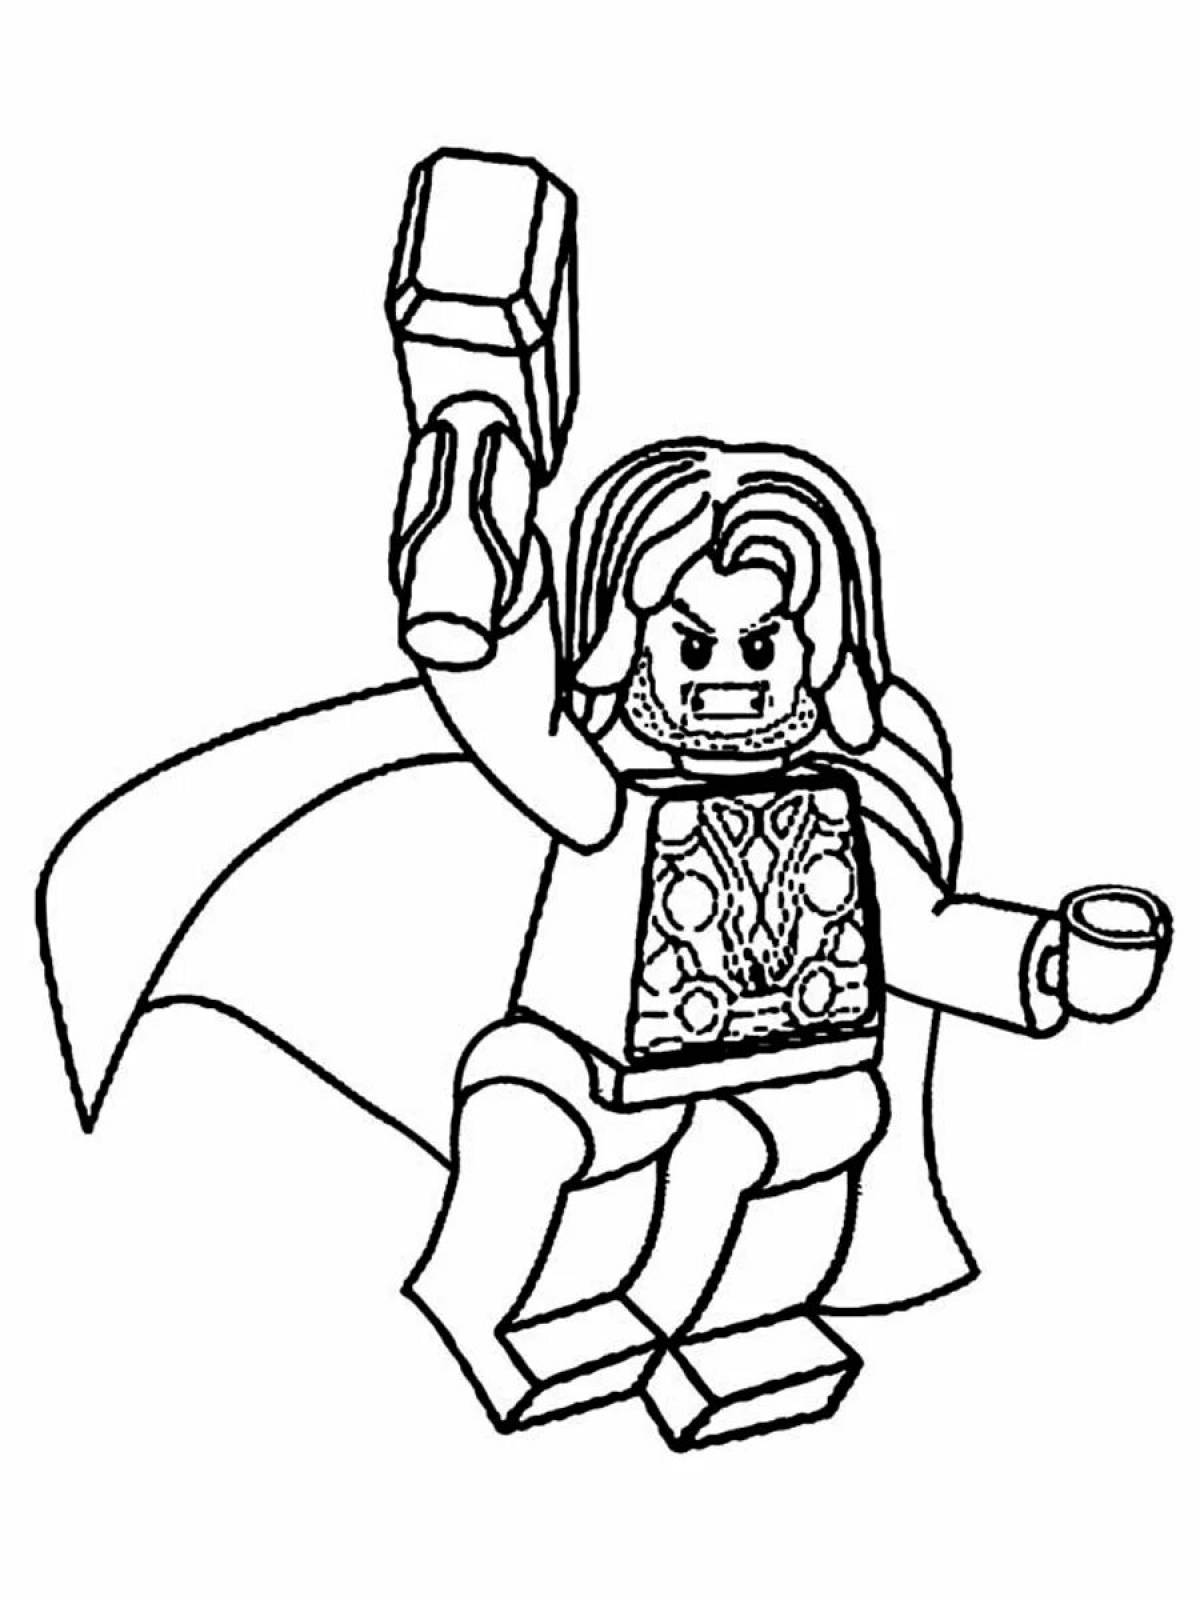 Great lego heroes coloring pages